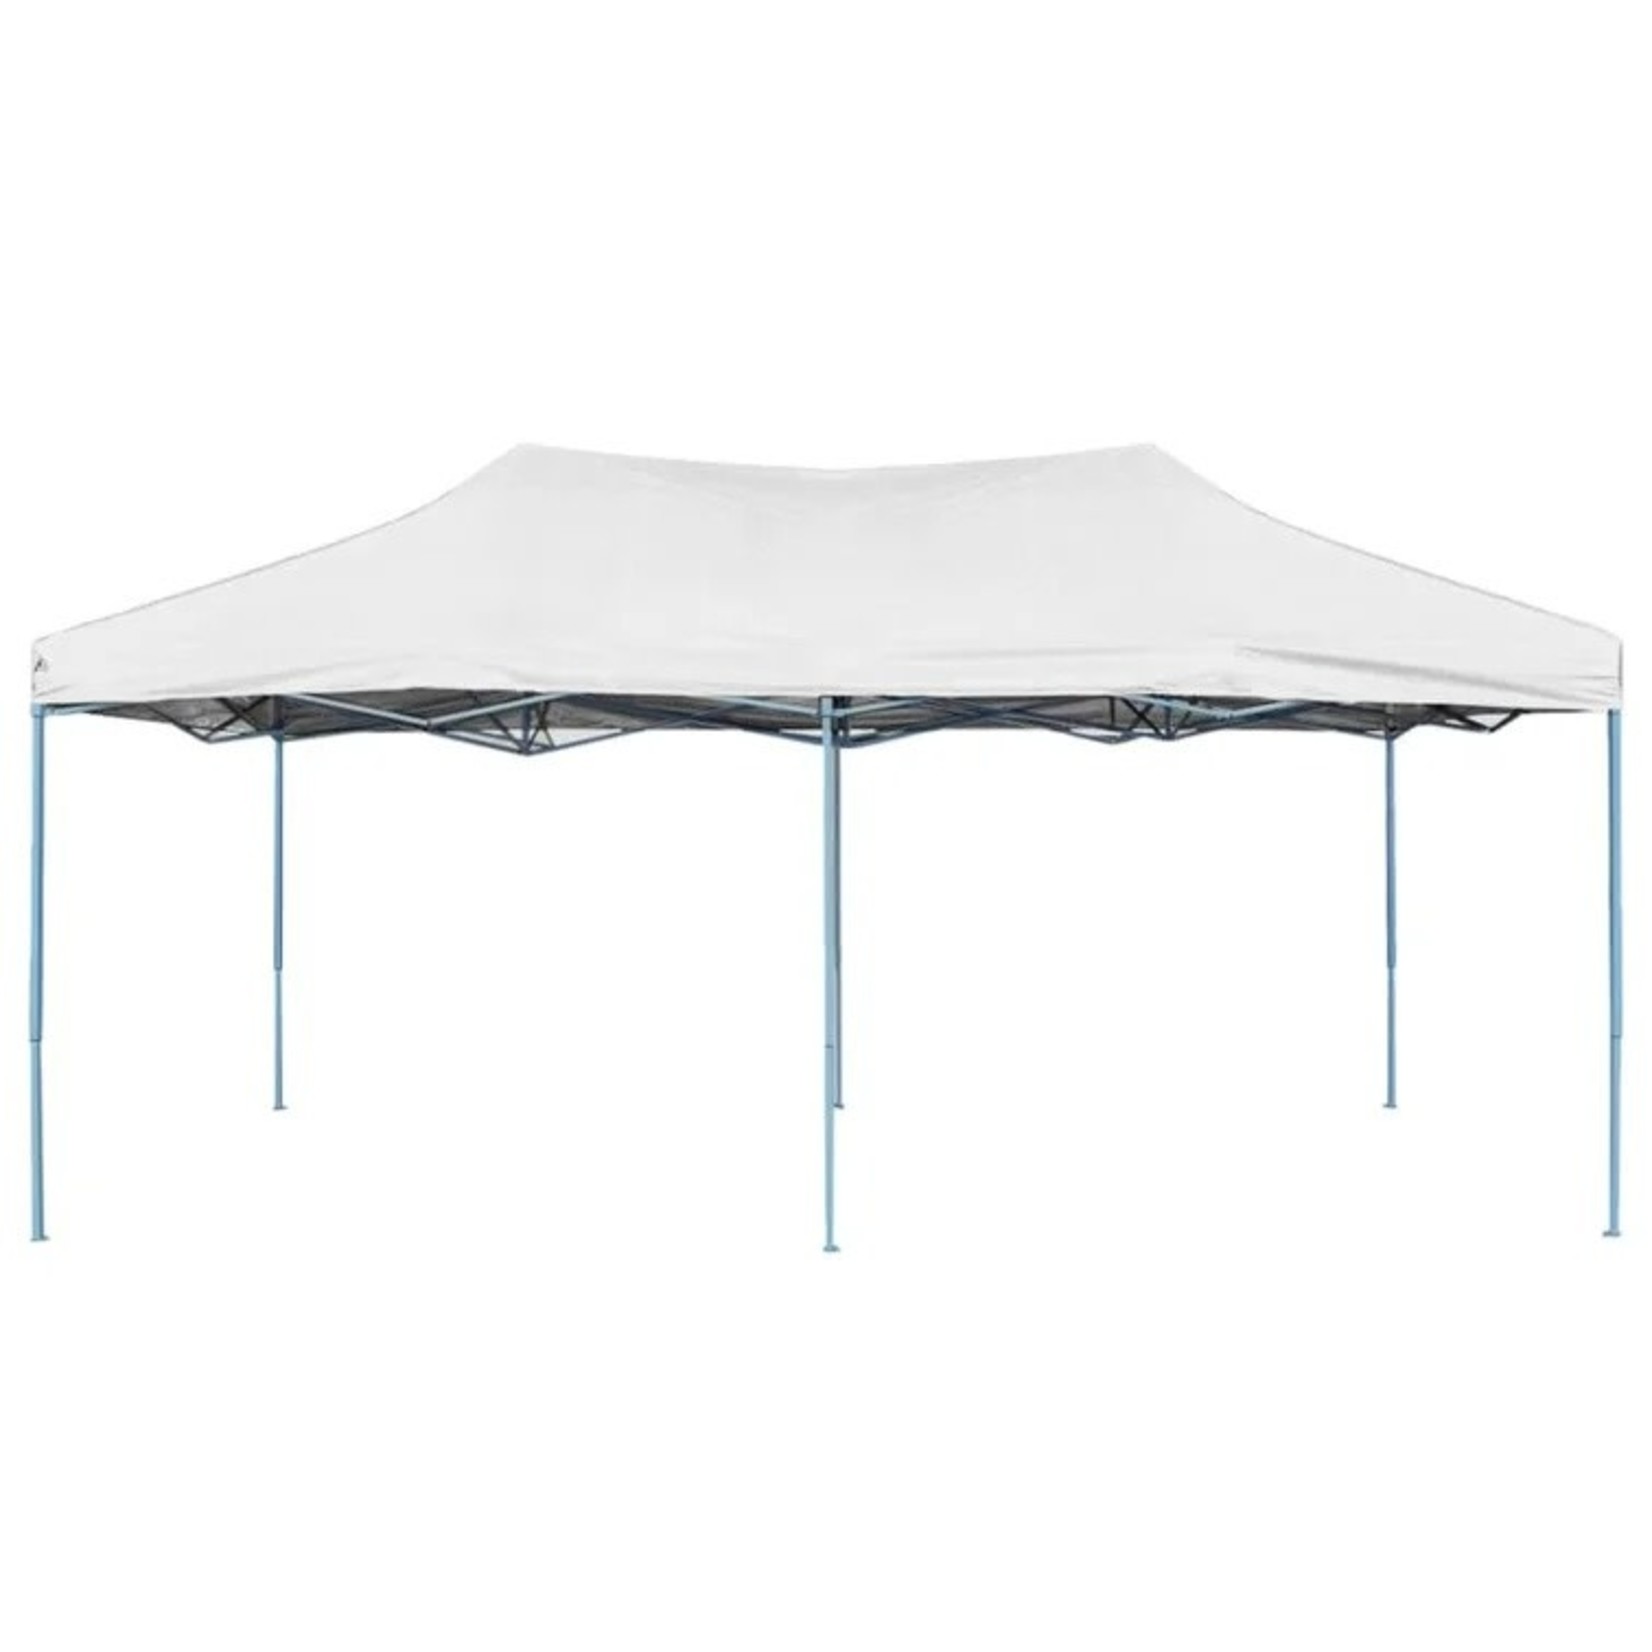 *Arlmont & Co. 20 Ft. W x 10 Ft. D Steel Party Tent